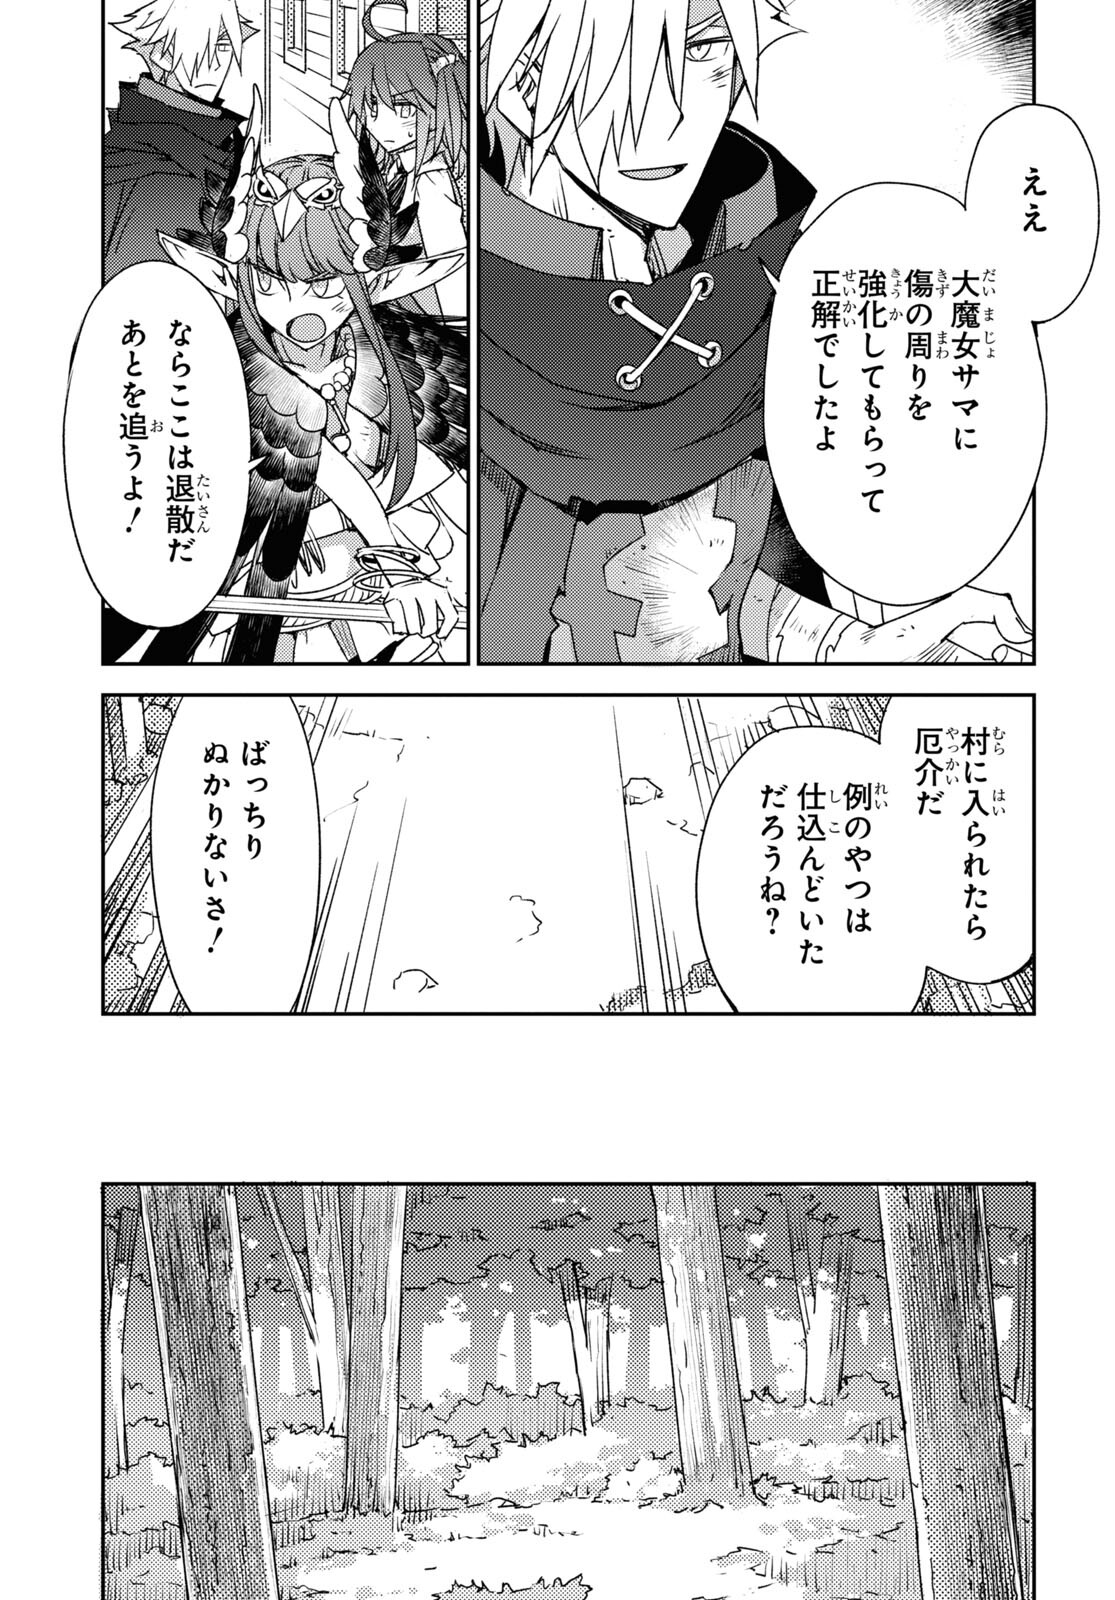 Fate/Grand Order -Epic of Remnant- 亜種特異点IV 禁忌降臨庭園 セイレム 異端なるセイレム 第38話 - Page 19